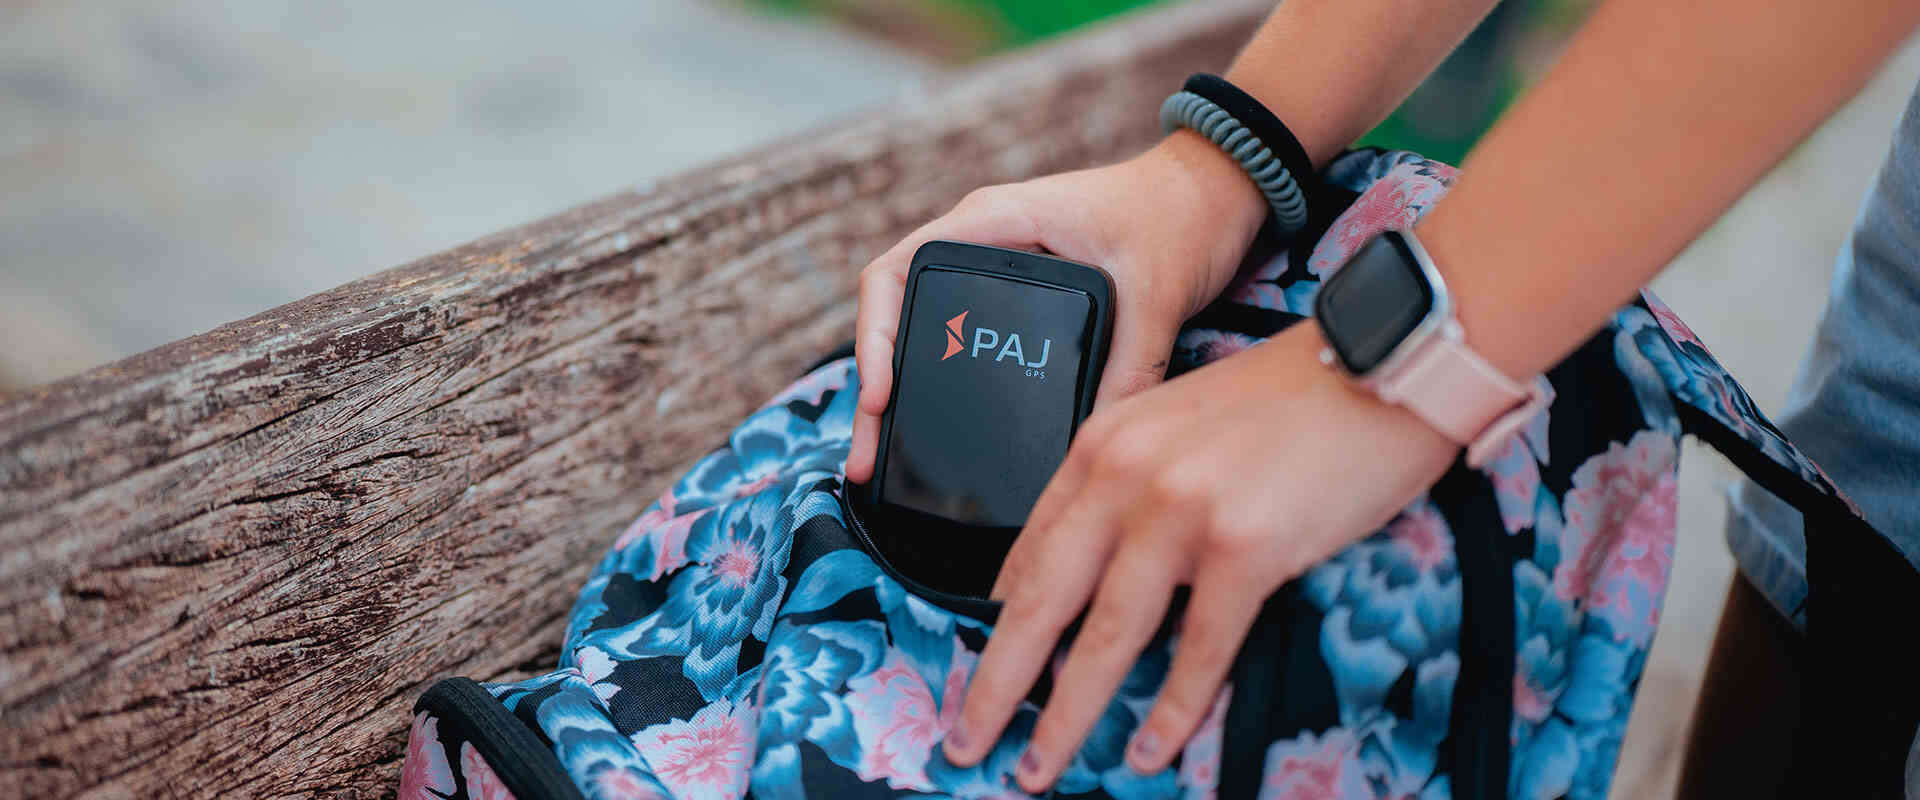 Paj gps tracker safely stored in a bag